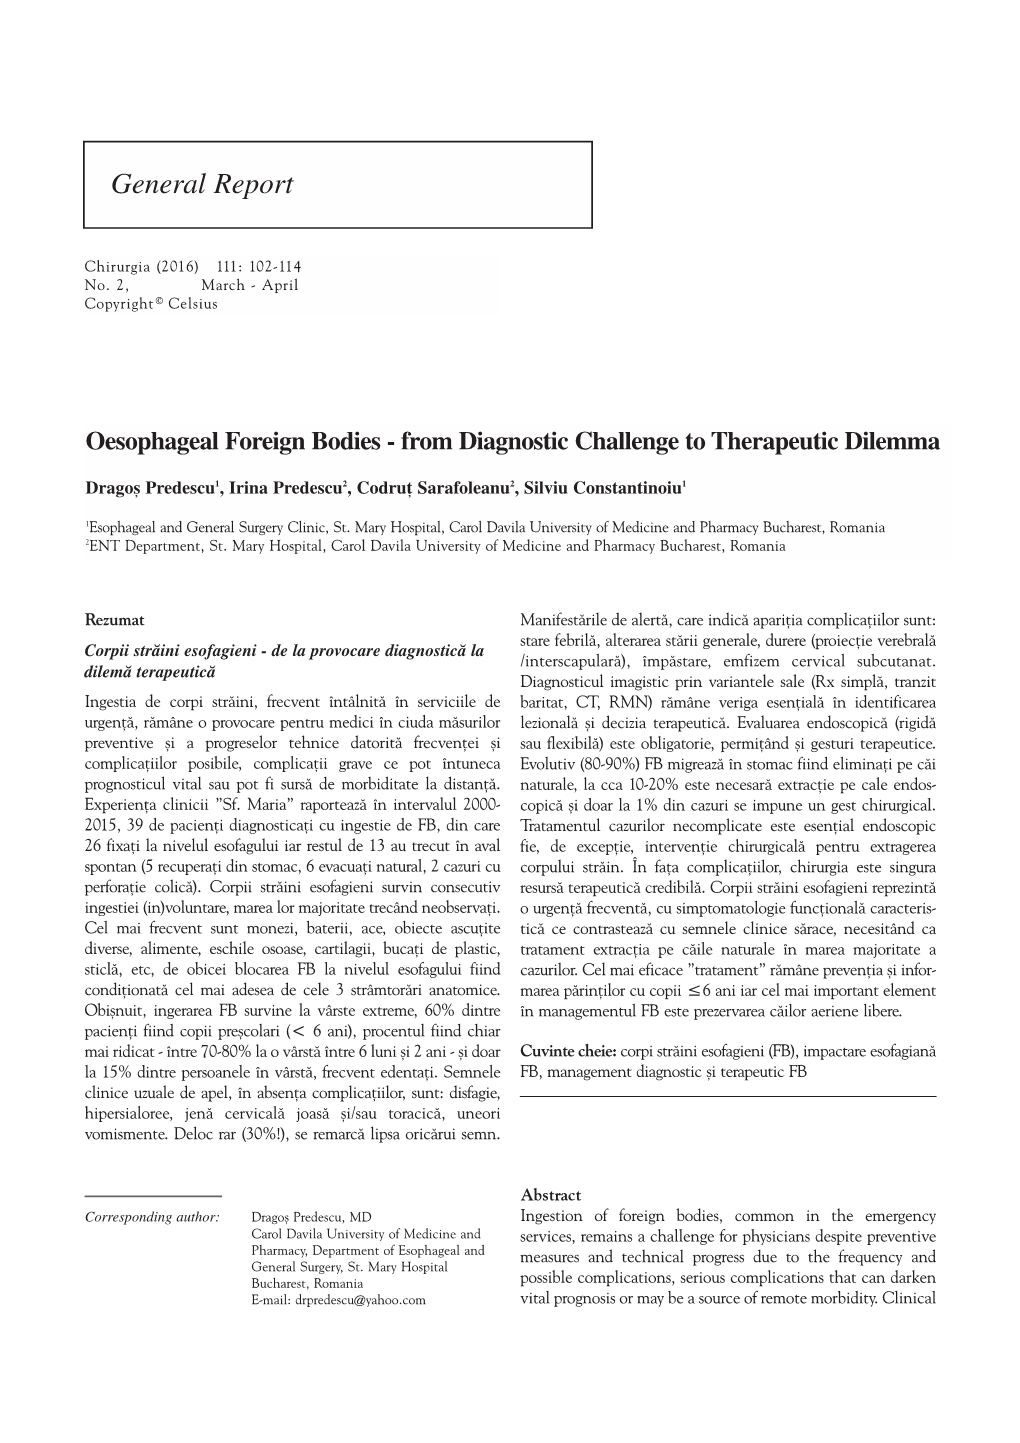 Oesophageal Foreign Bodies - from Diagnostic Challenge to Therapeutic Dilemma